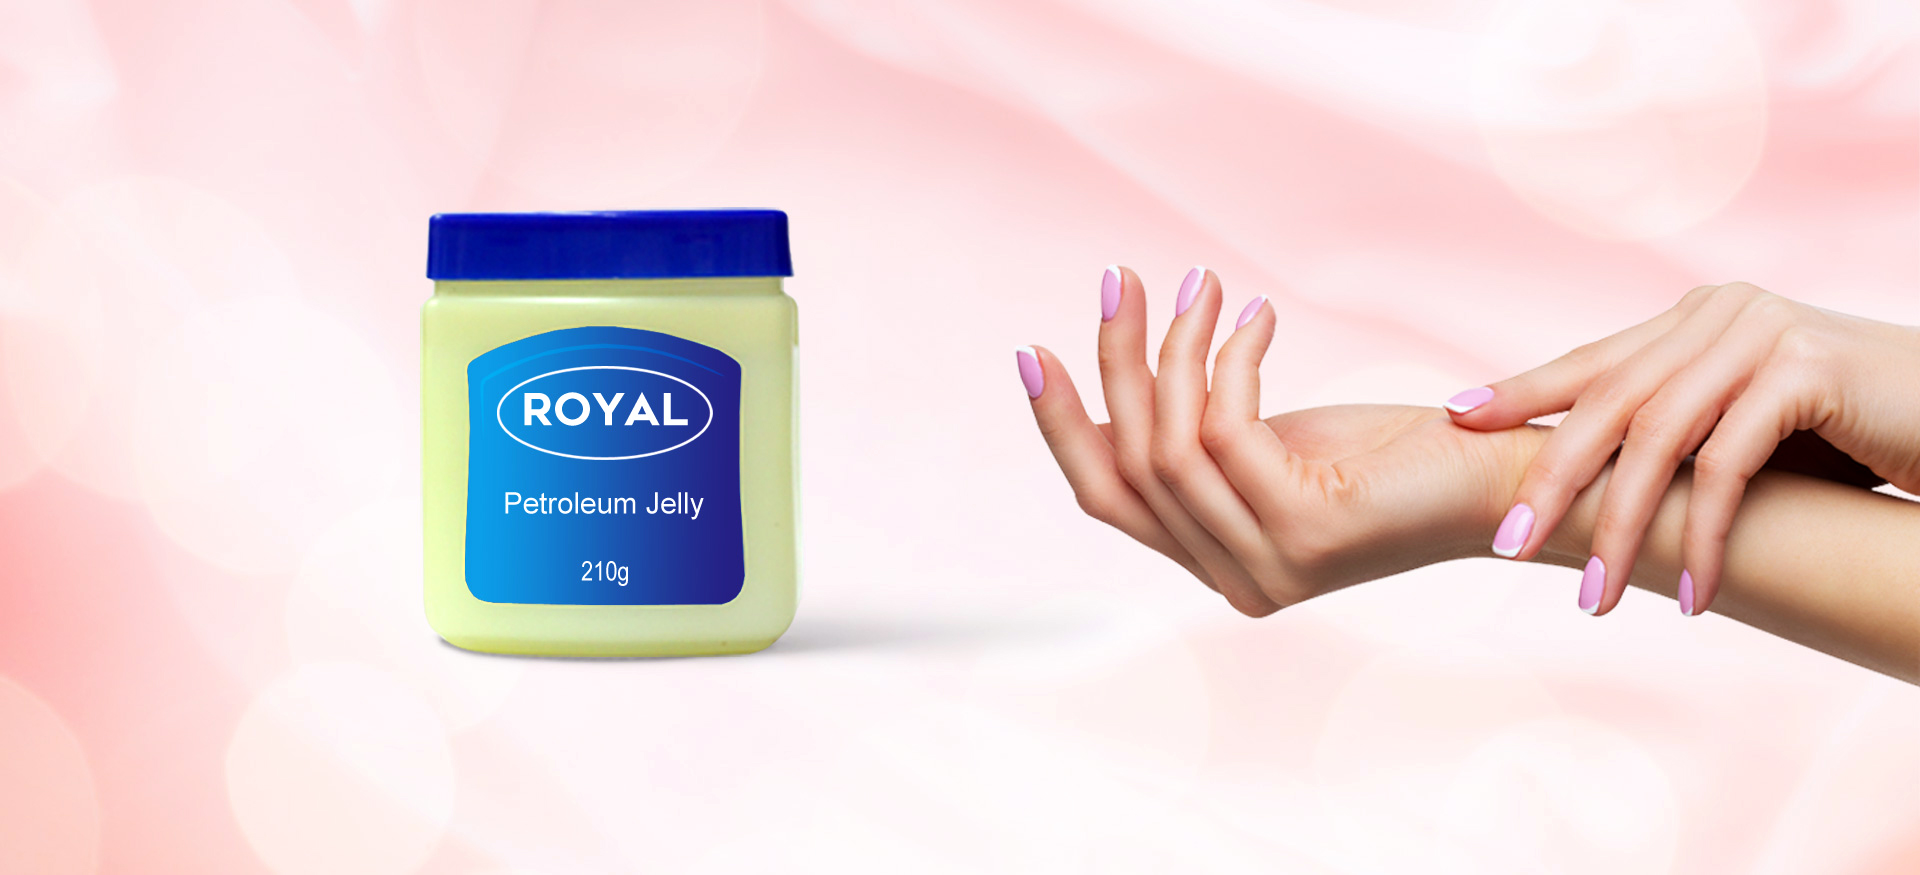 Image of a woman's hand showcasing Royal Petroleum jelly, a popular product from Royal Exports